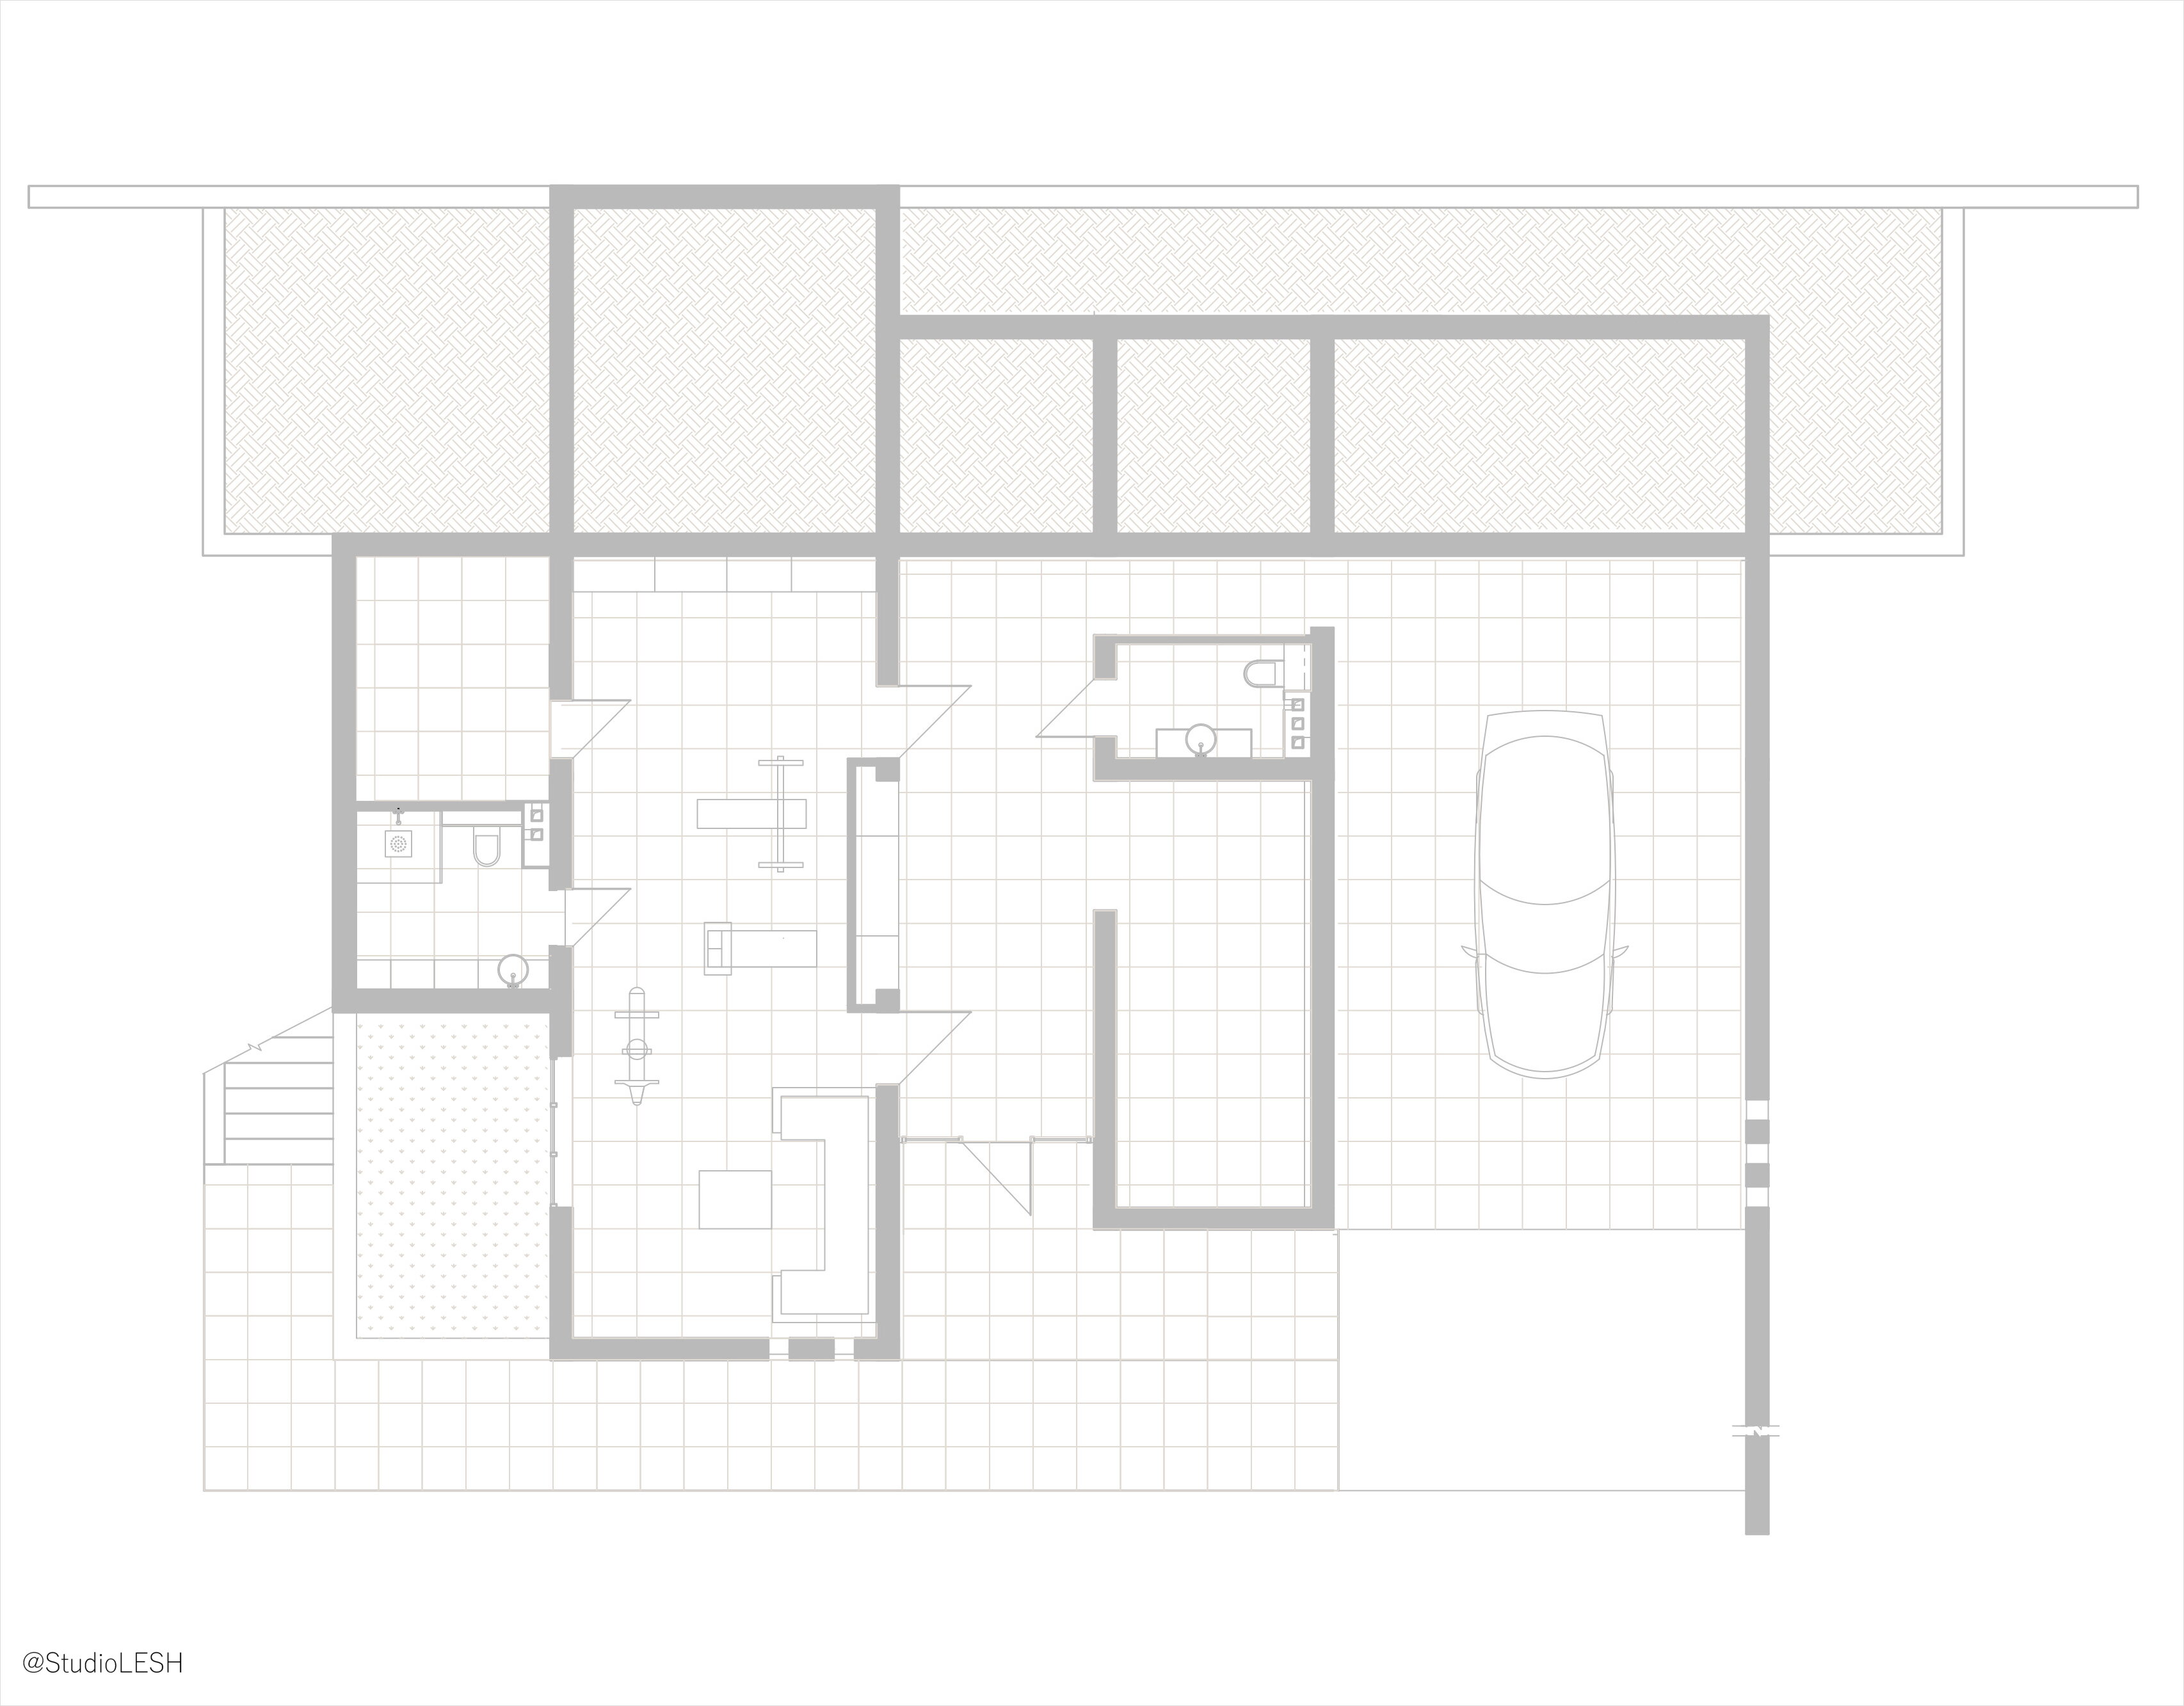 The layout of the house in Sochi. First floor.